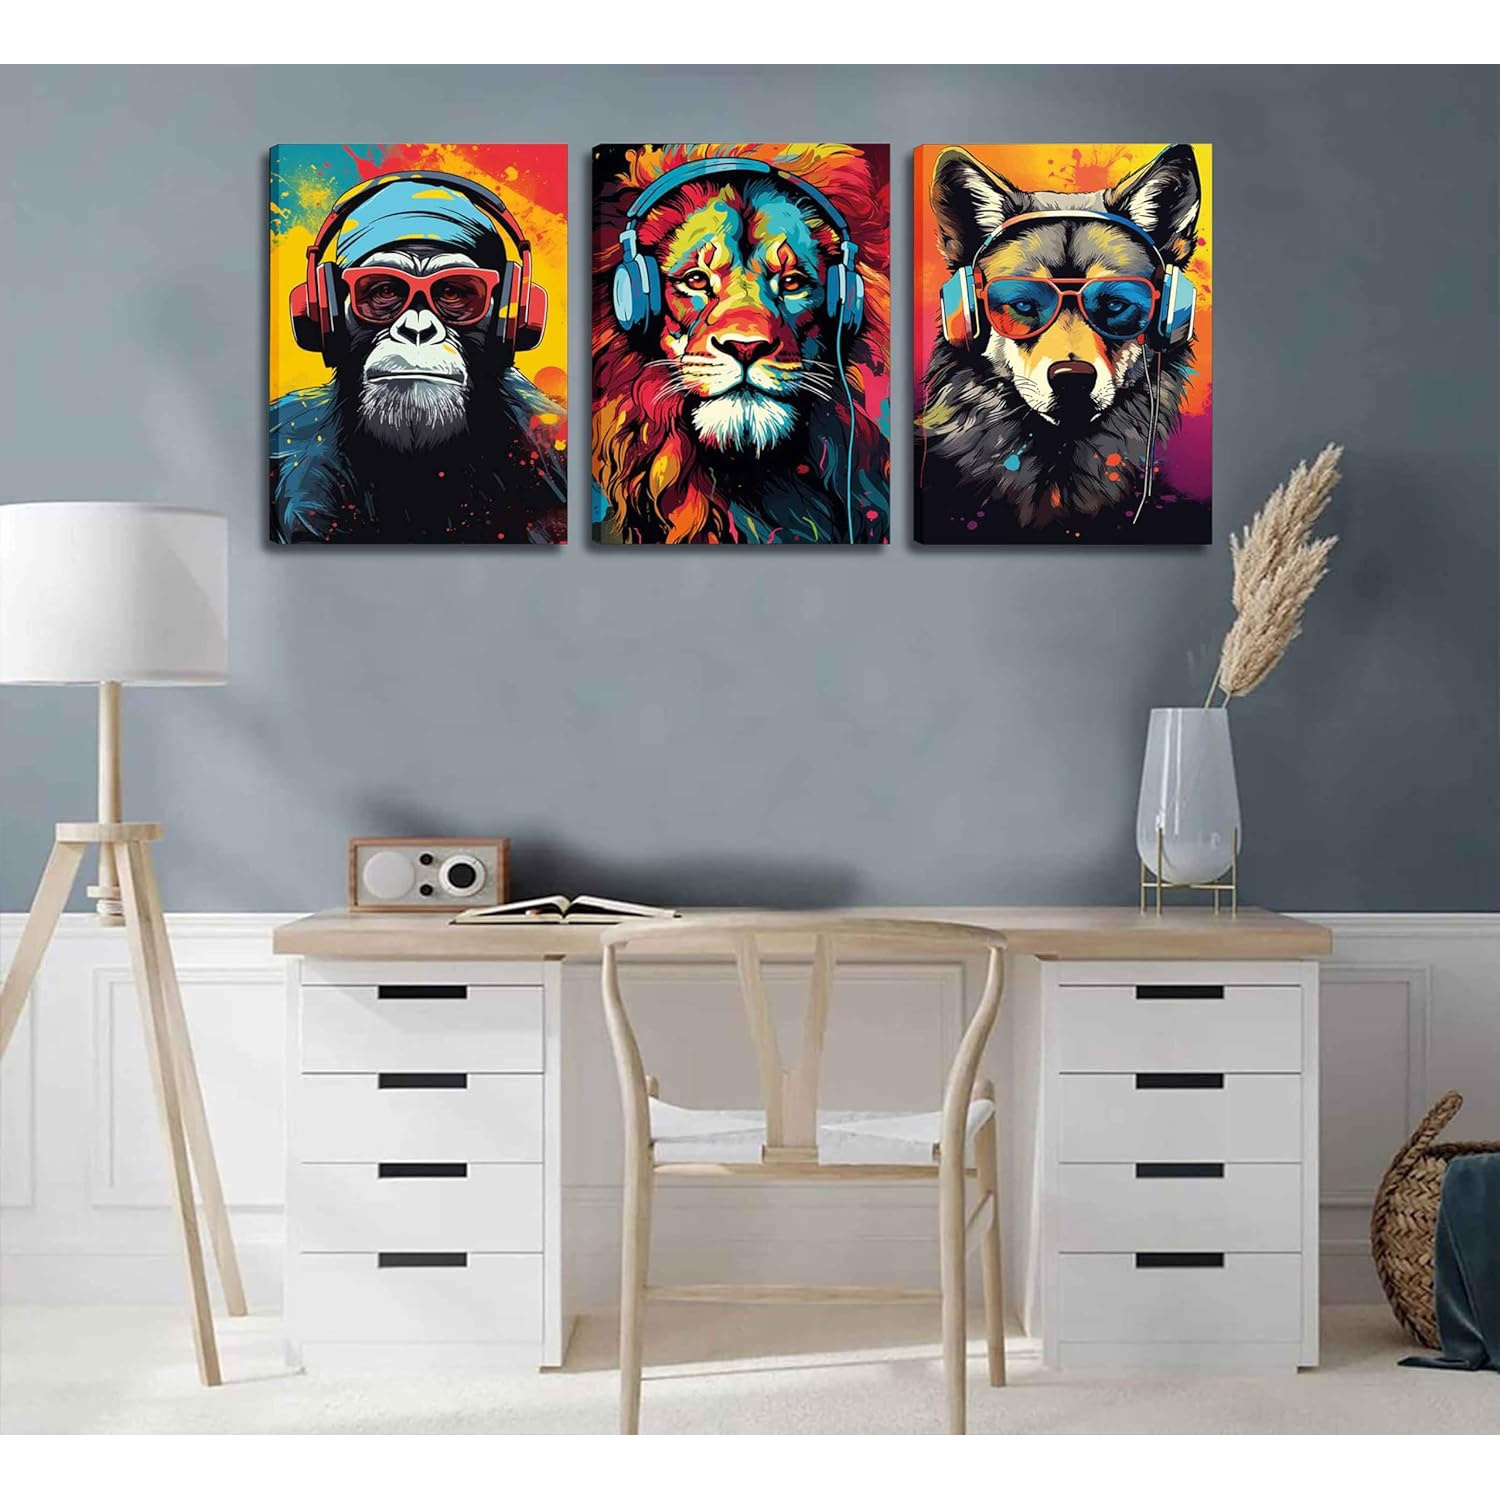 

3pcs Gaming Wall Art Animal Graffiti Posters Pictures With Headphones Sunglasses Gorilla Tiger Wolf Cool Gamer Canvas Prints Colorful Graffiti Paintings For Teens Game Boys Room Wall Decor Framed